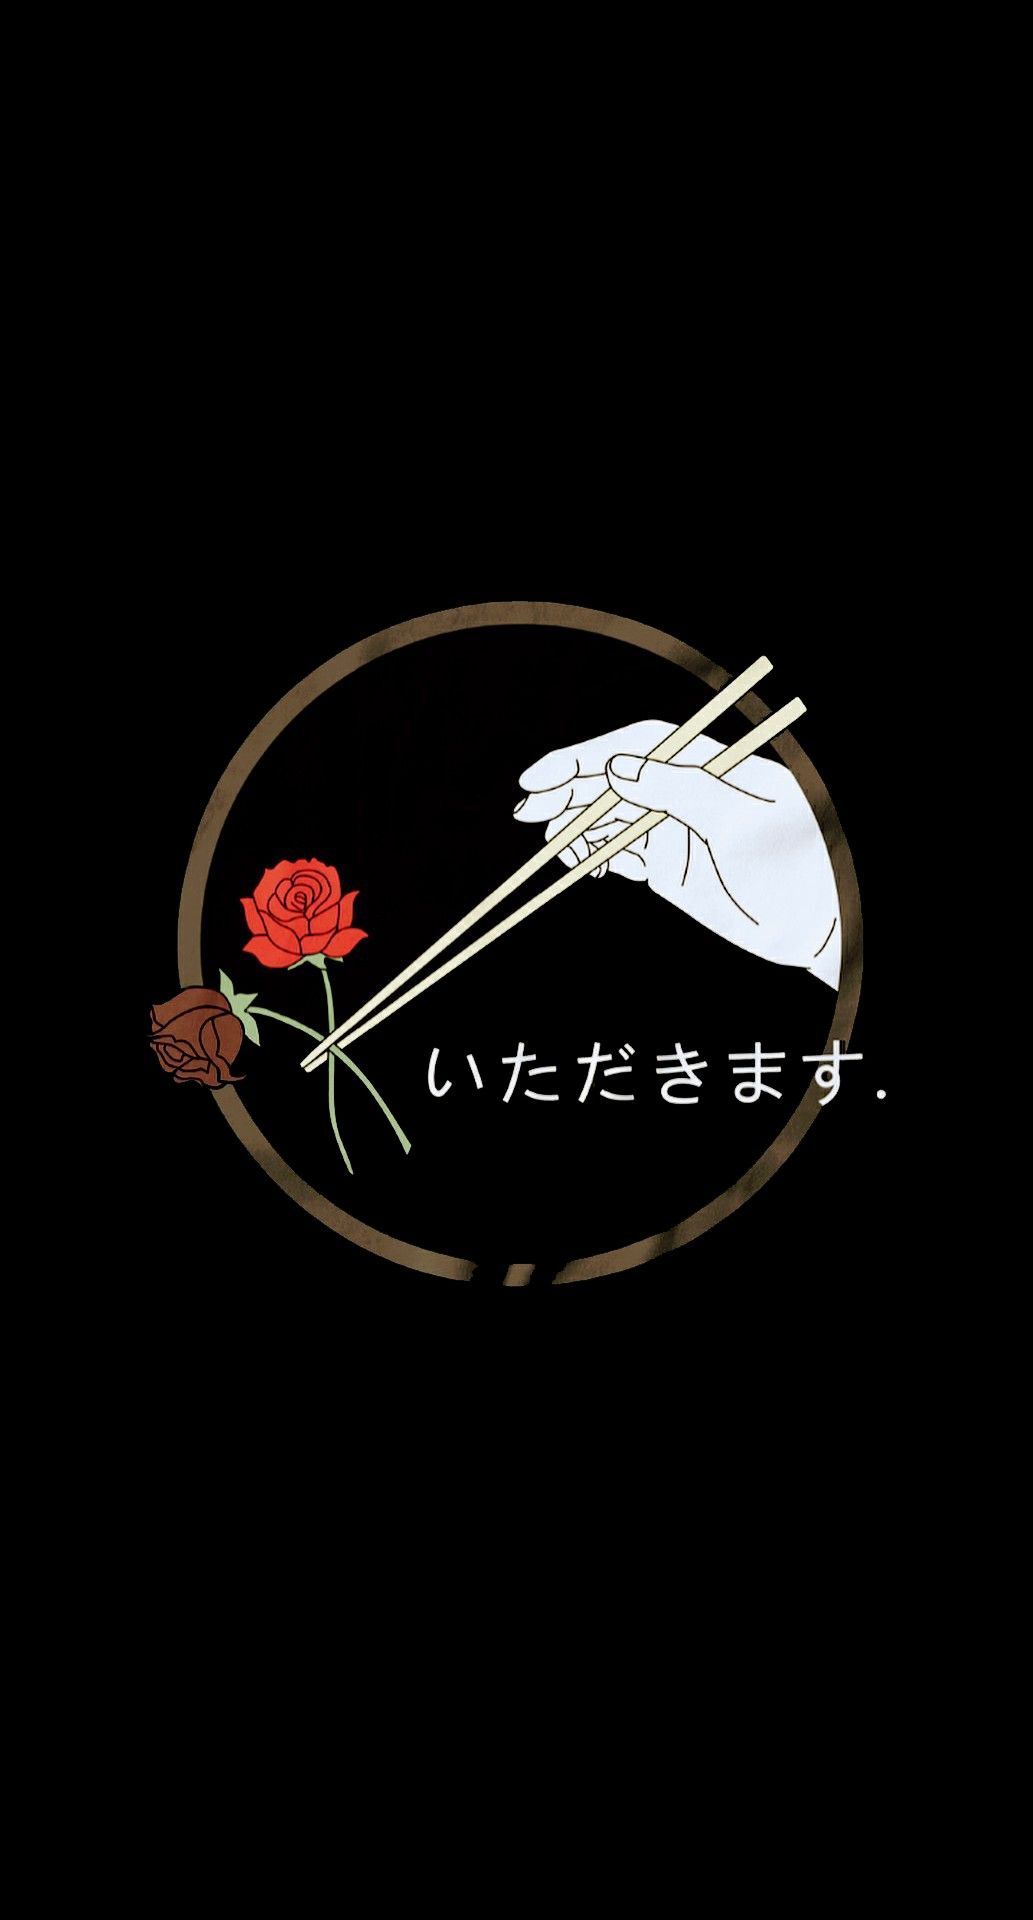 Aesthetic phone wallpaper with a hand holding chopsticks and a rose - Dark vaporwave